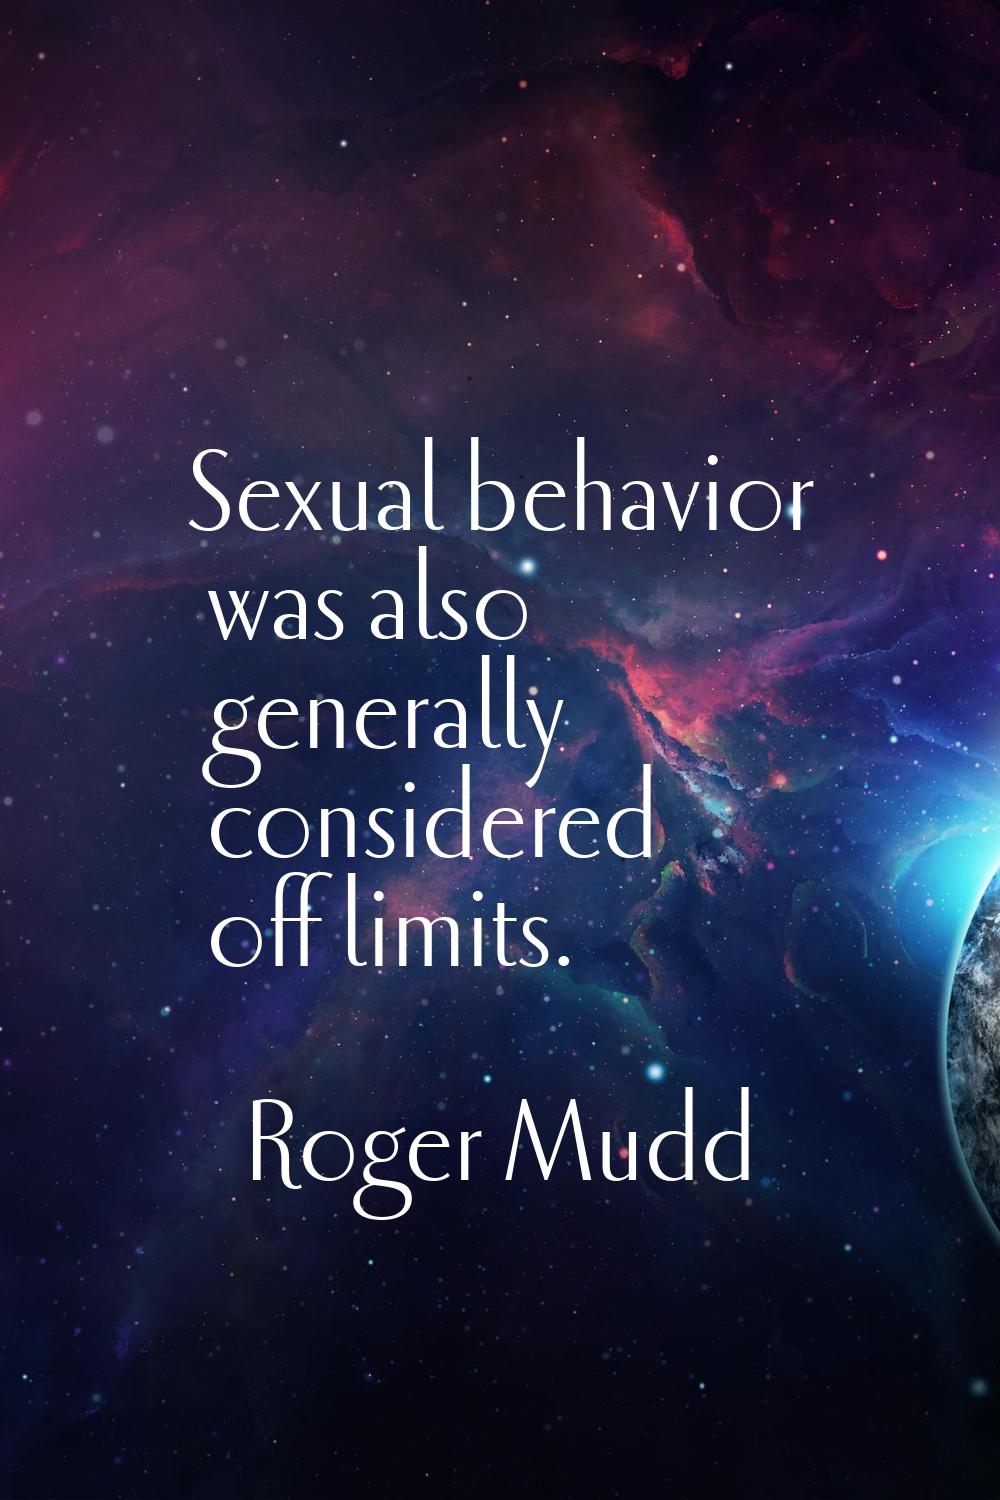 Sexual behavior was also generally considered off limits.